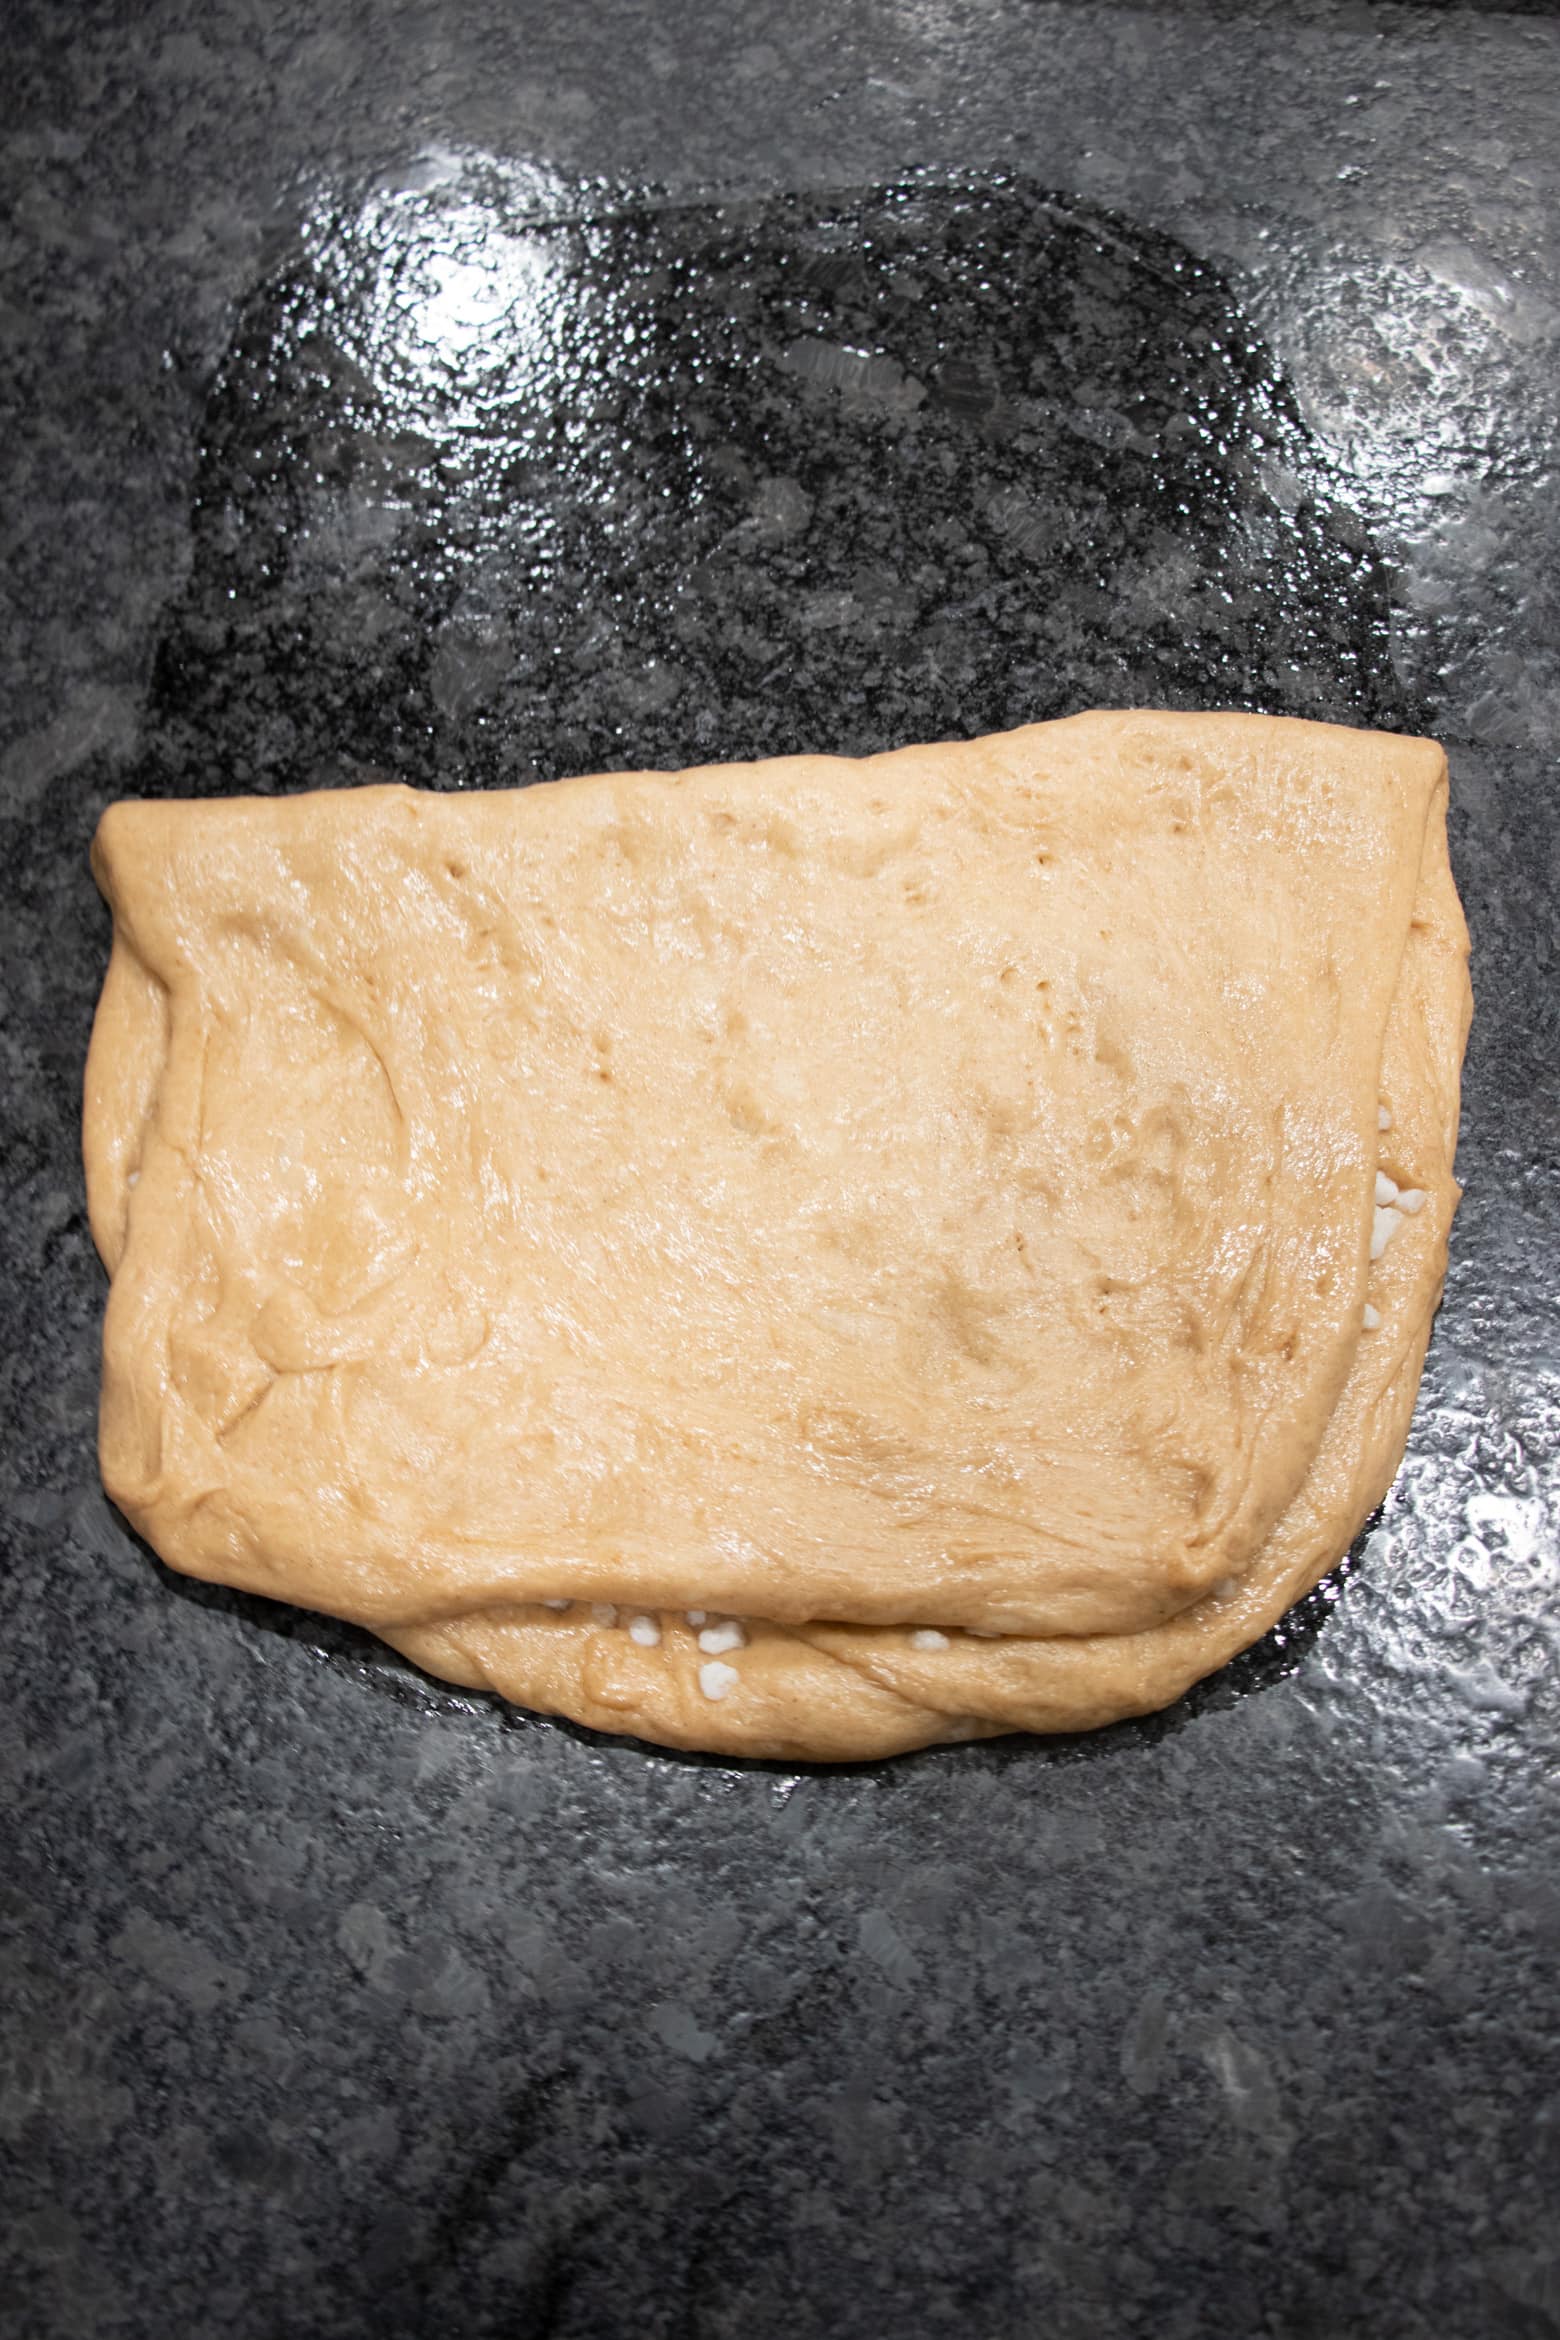 liege dough folded on top of itself.